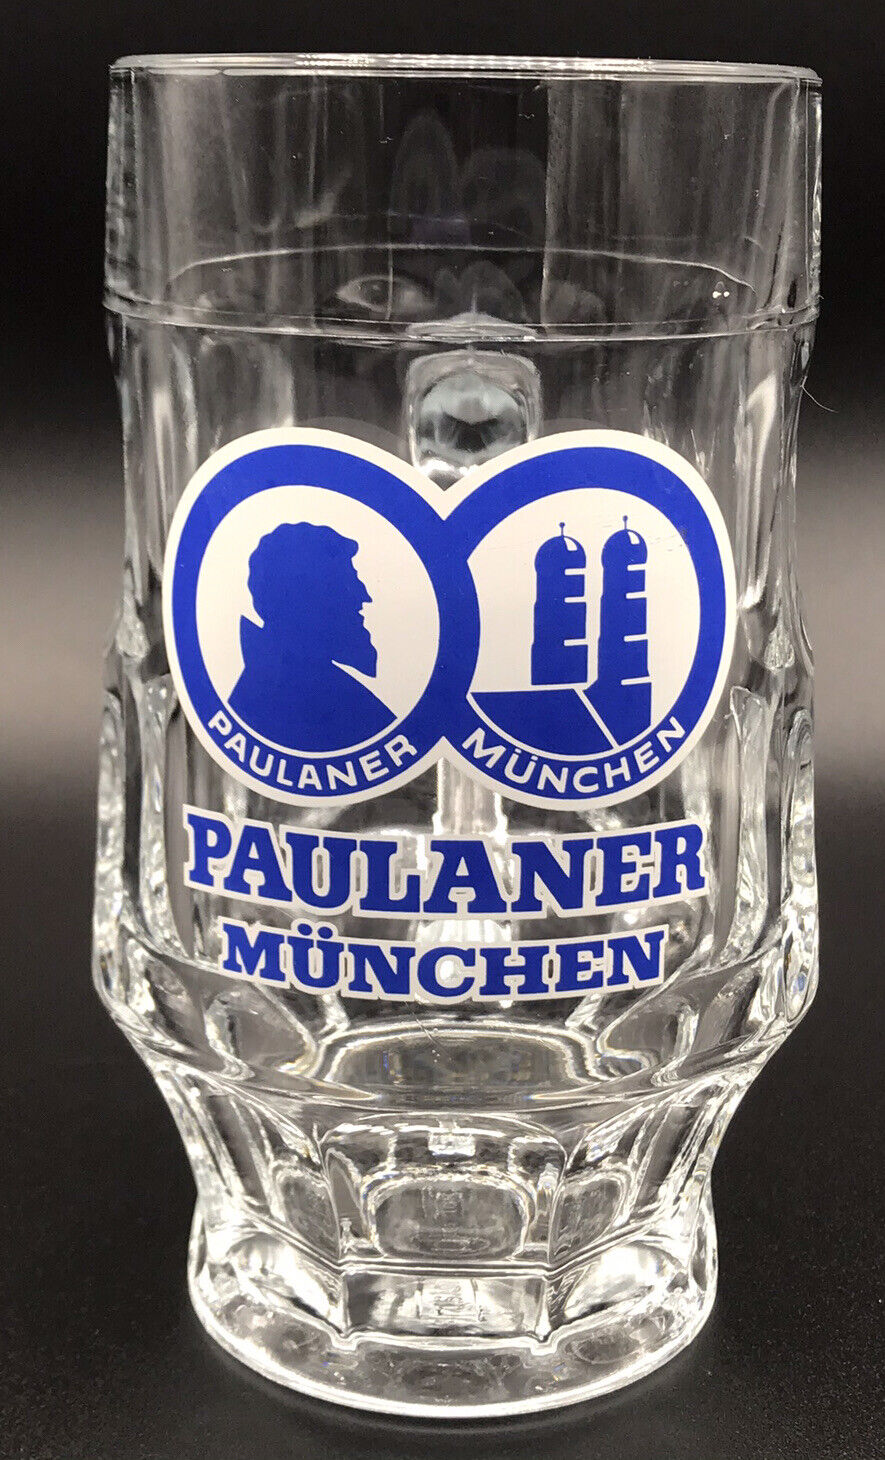 PAULANER MÜNCHEN Beer Dimpled Glass Stein Mug 0.4L Excellent Condition 6” Tall